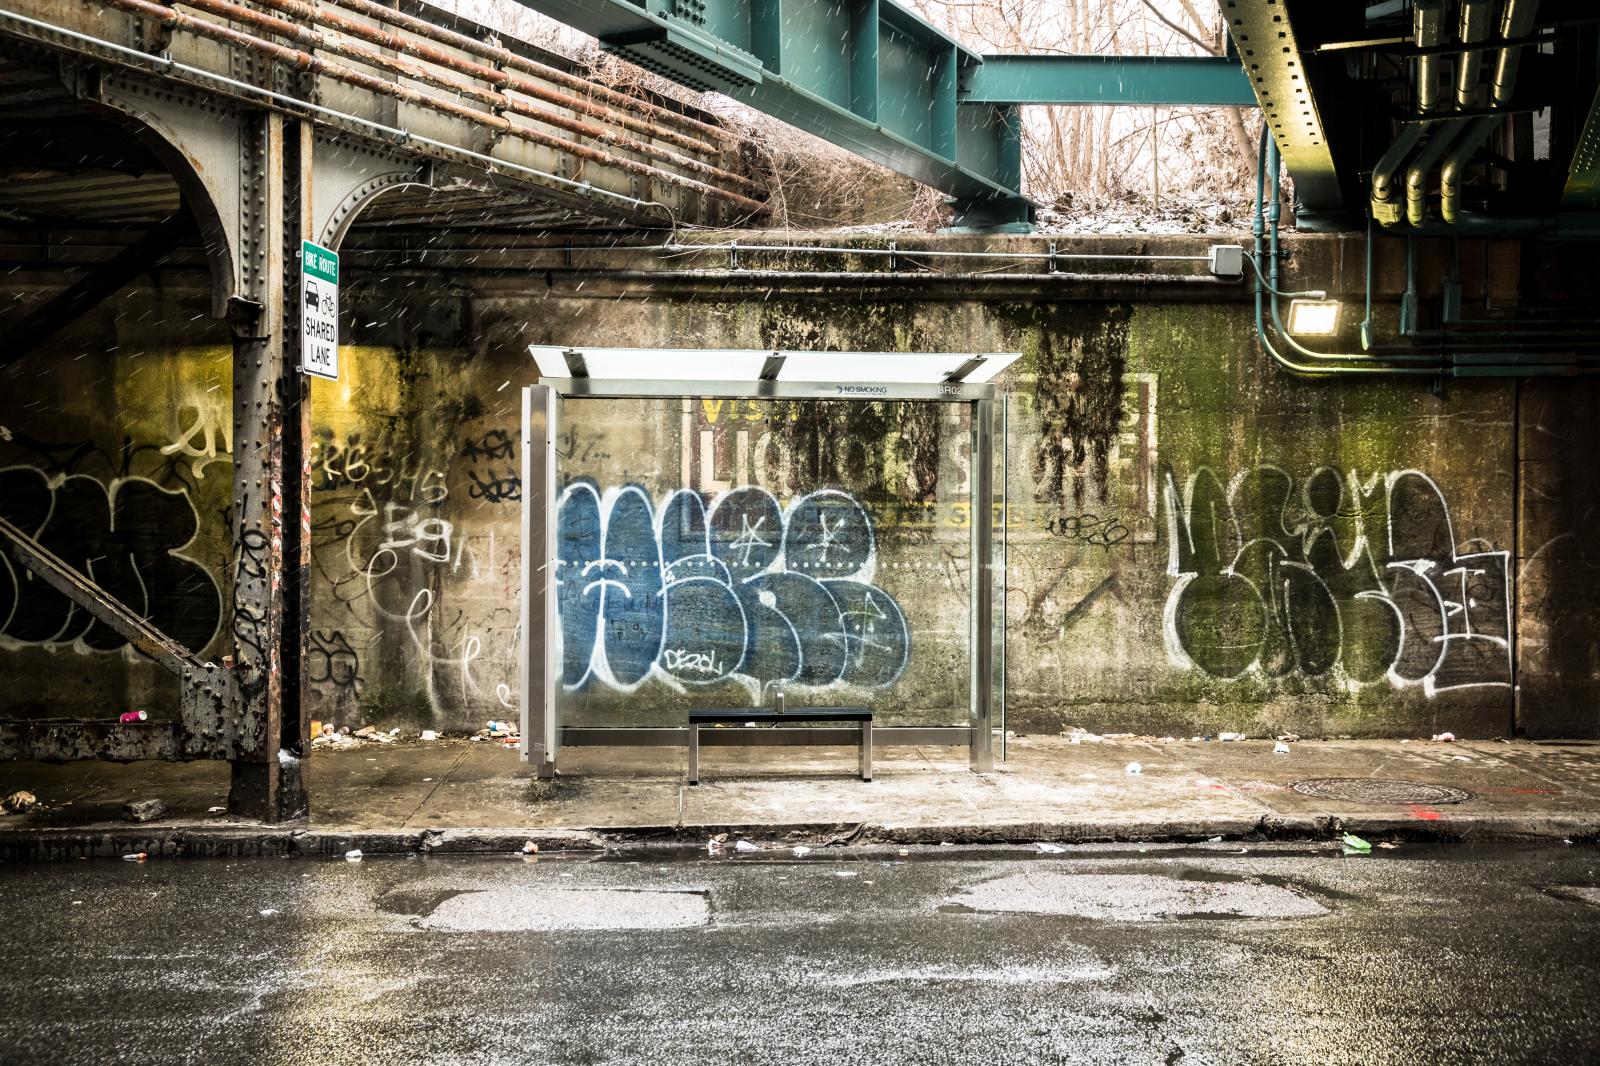 Bus stop with graffiti